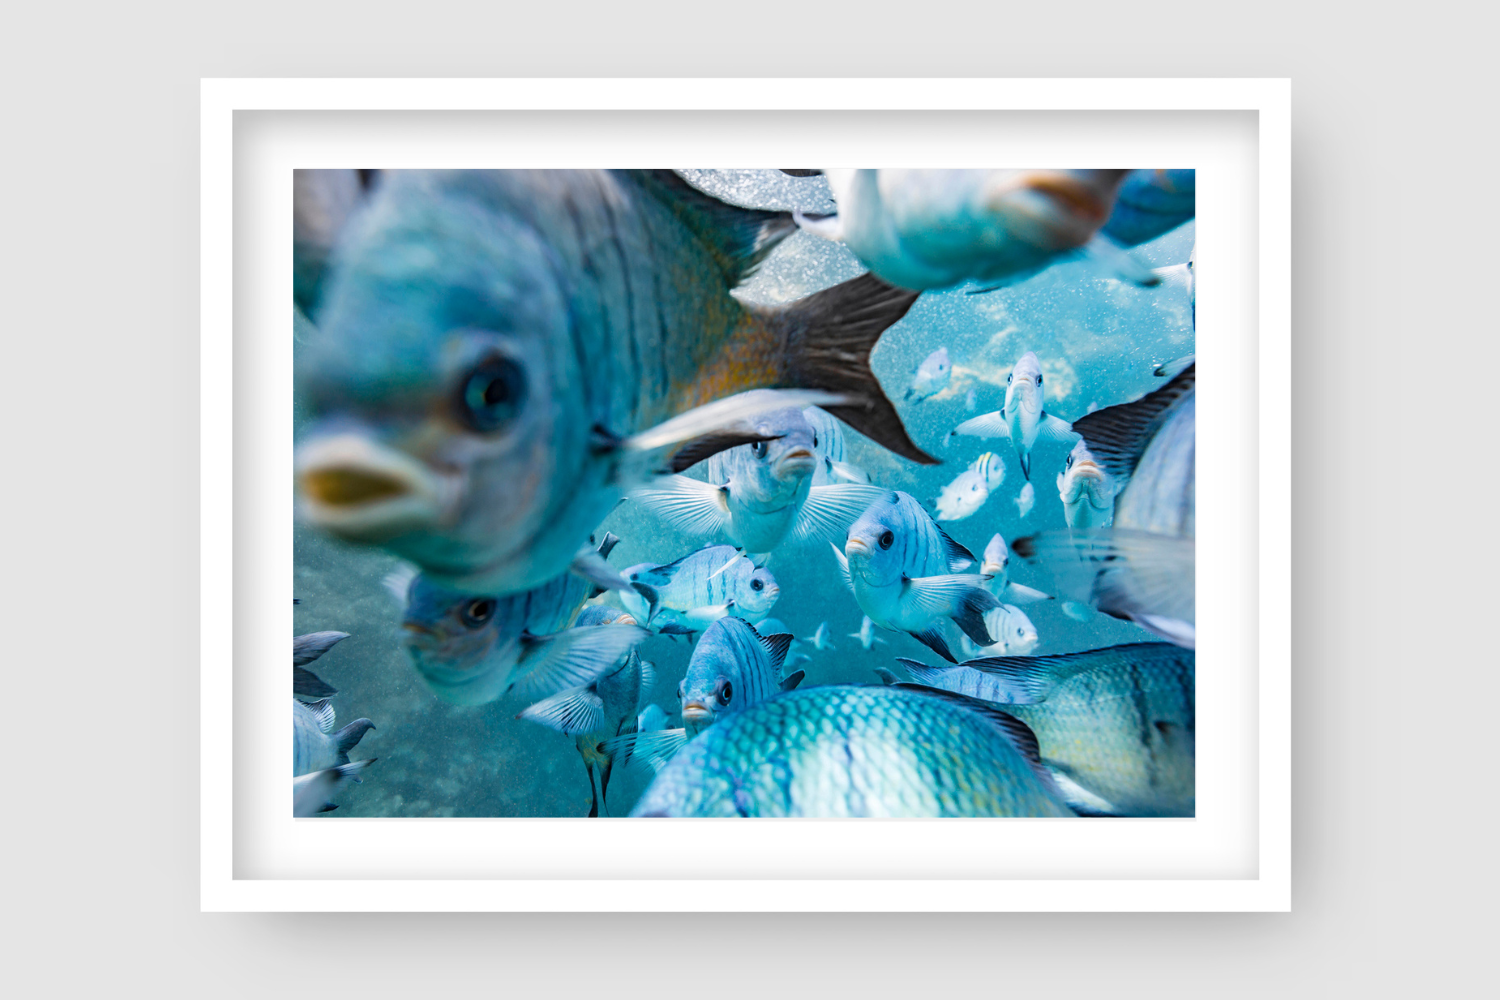 plethora of blue Damsel Fish swimming in large pack with blue waters surrounding